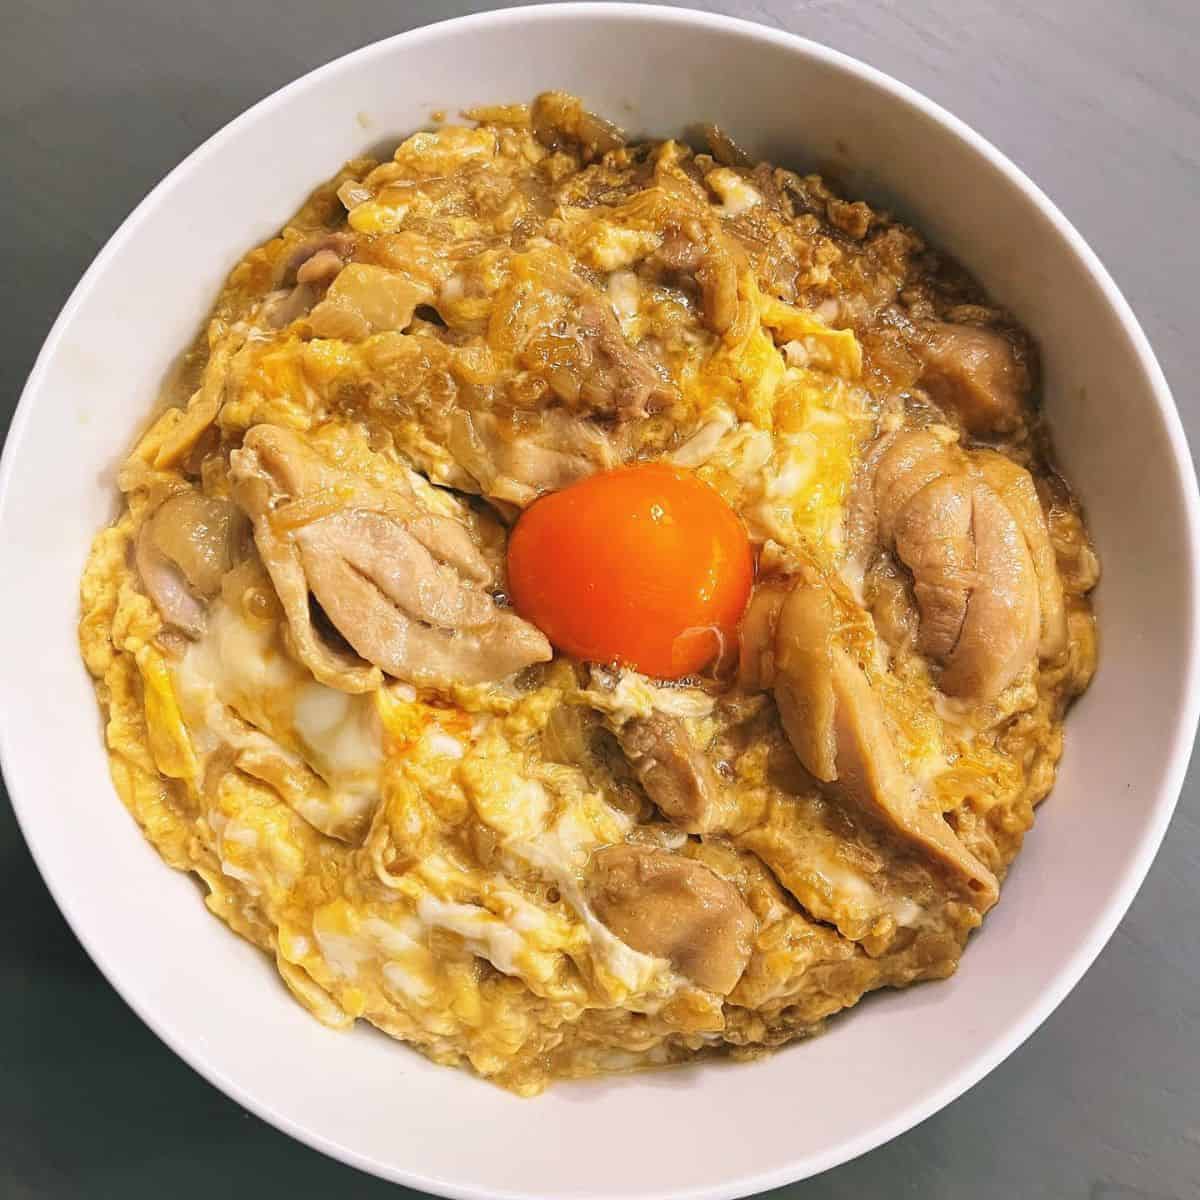 Beautifully prepared Oyakodon in a white bowl with egg yolk in the middle